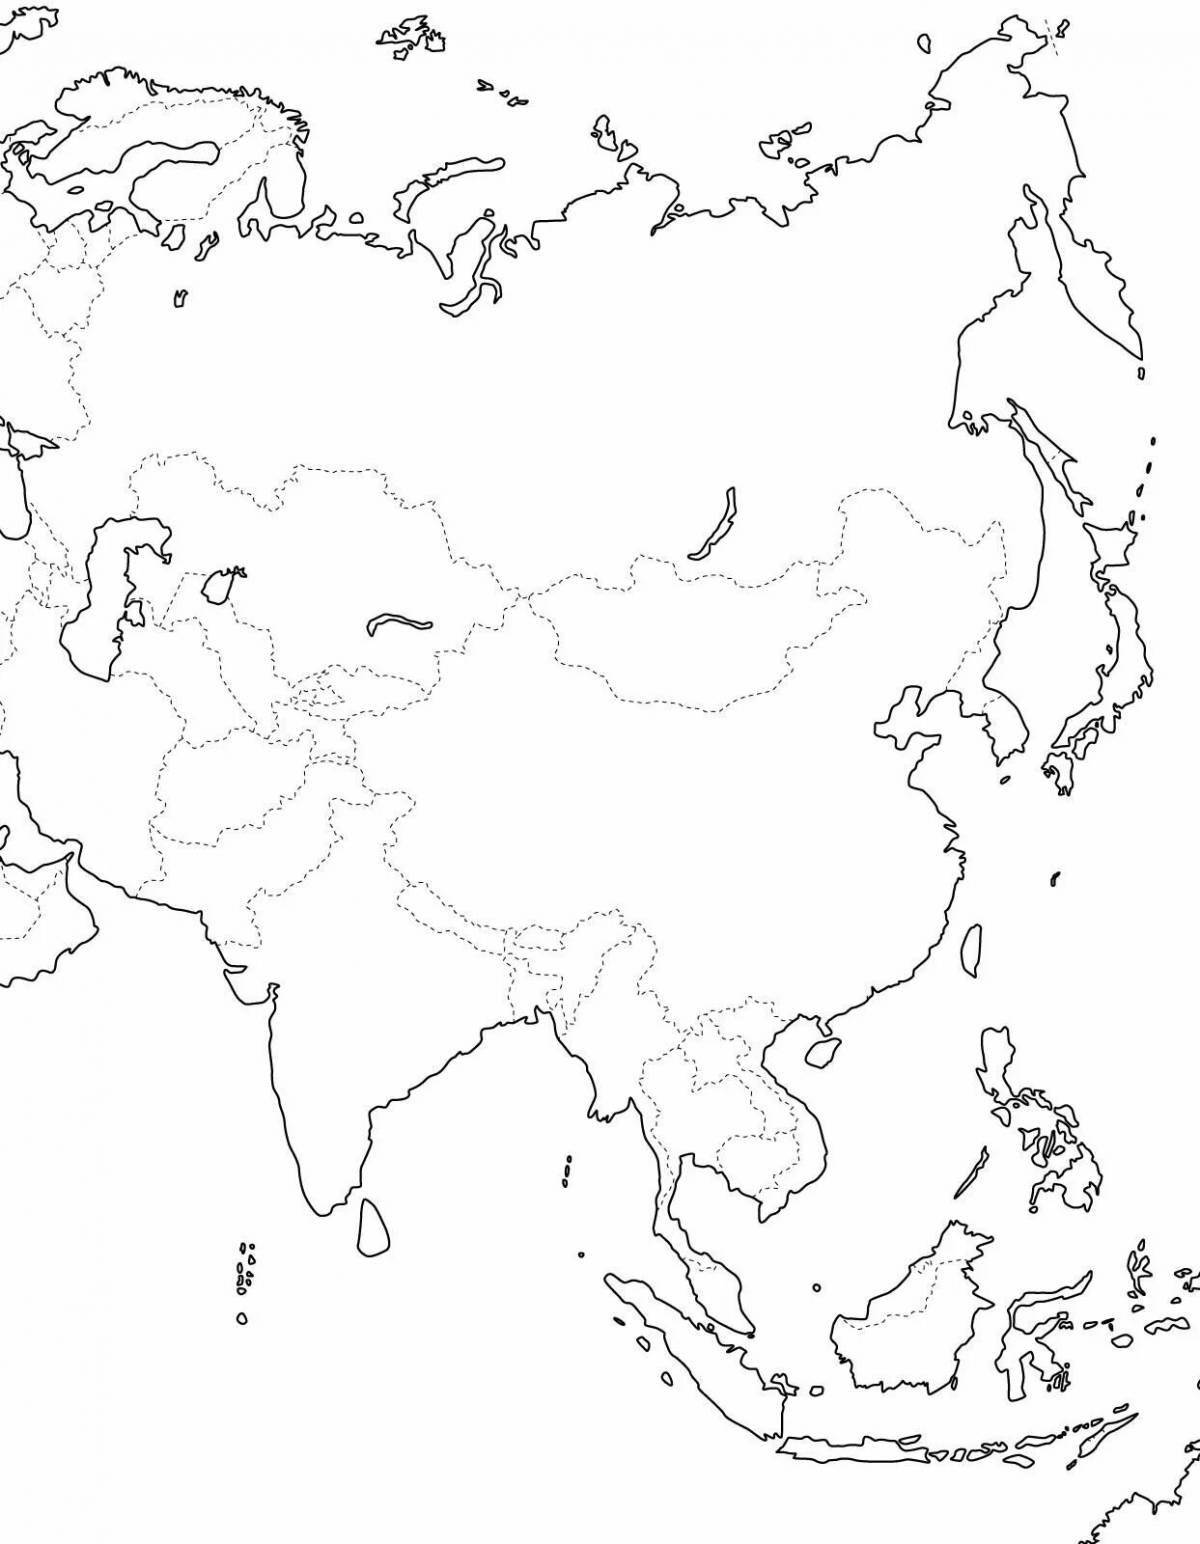 Coloring page colorful map of eurasia